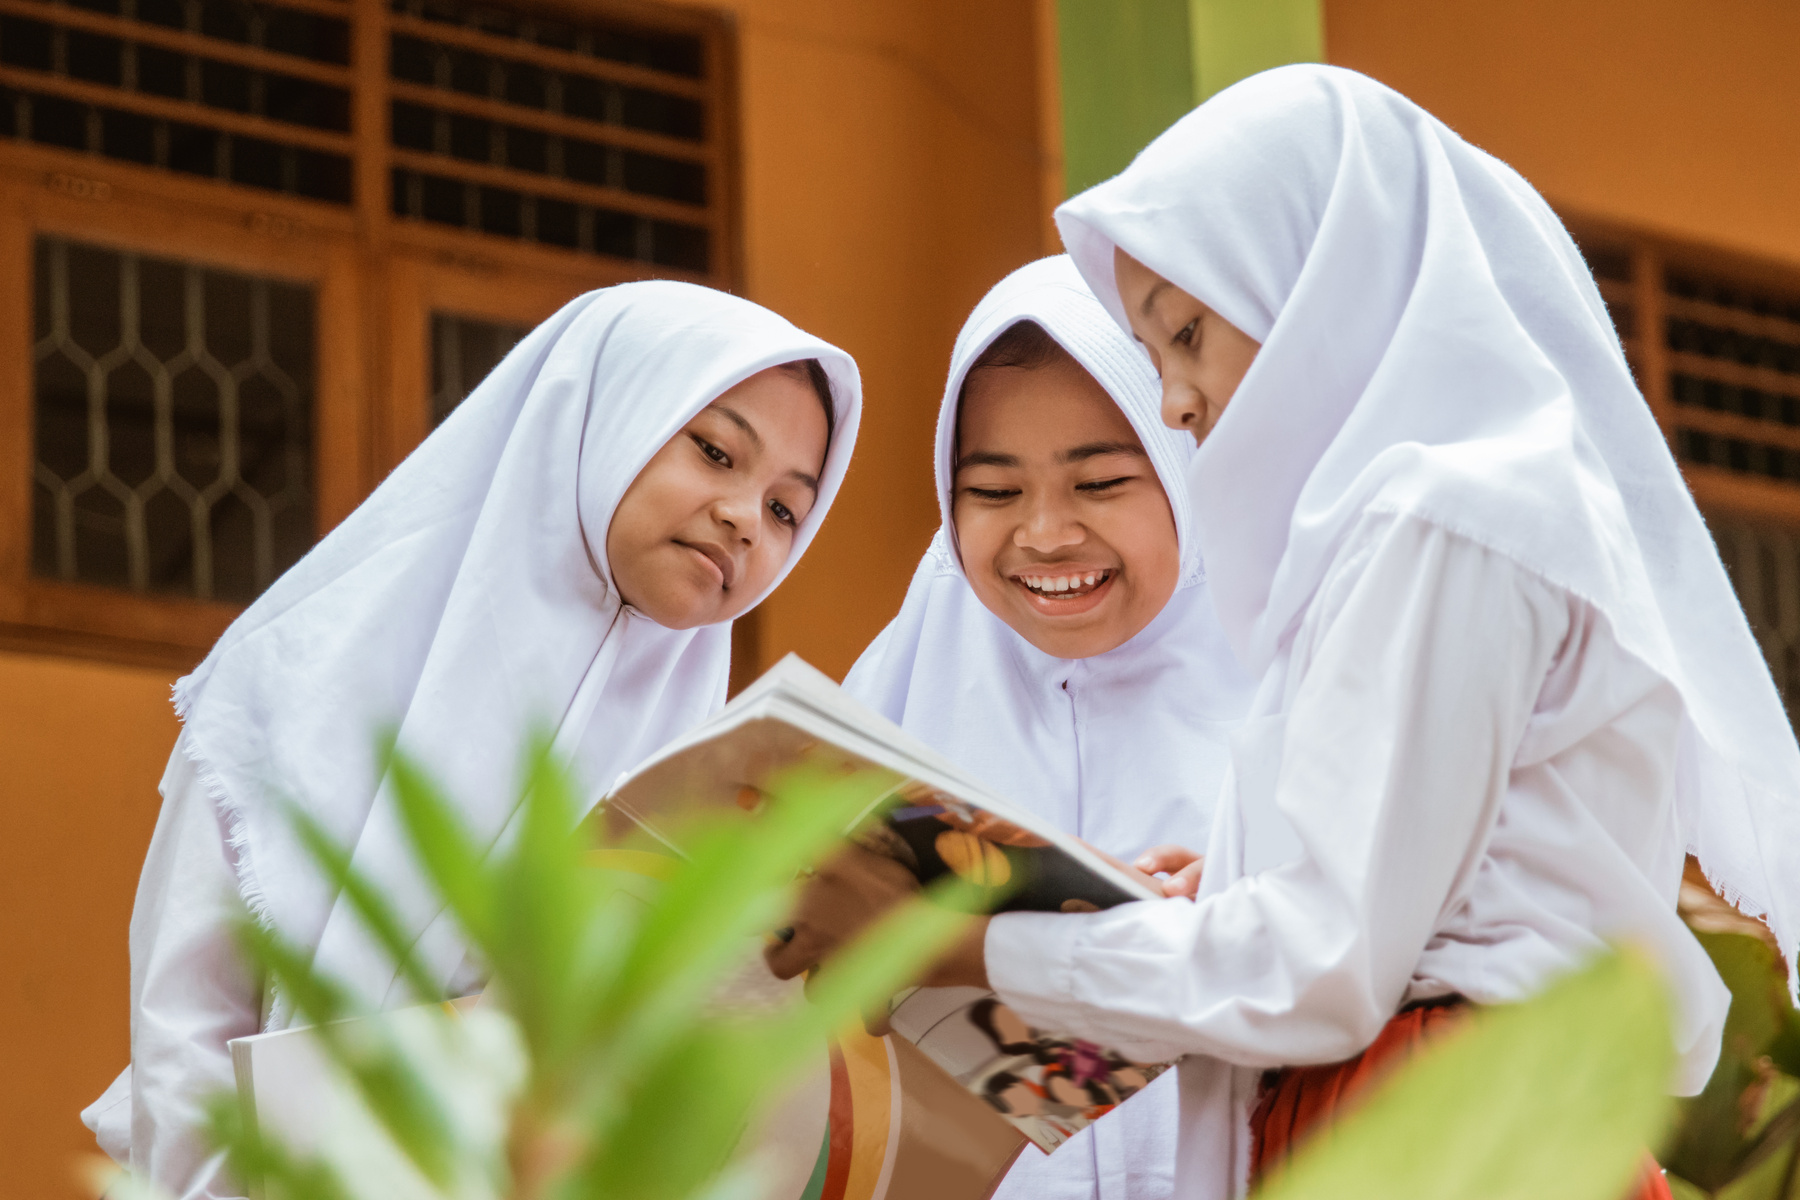 Islamic School Students Studying Together